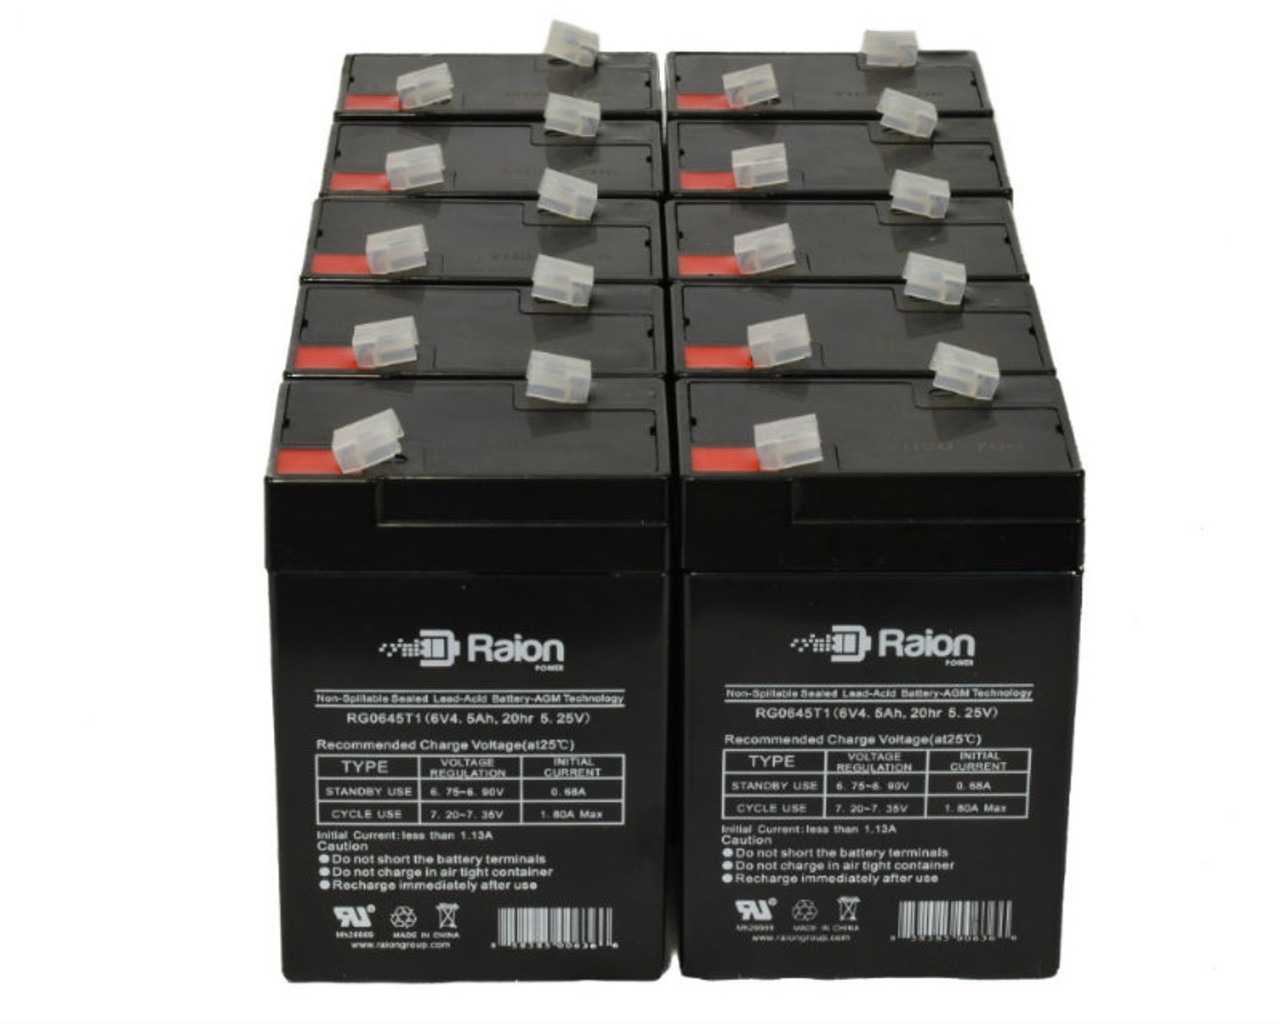 Raion Power 6V 4.5Ah Replacement Emergency Light Battery for Chloride 1000010148 - 10 Pack